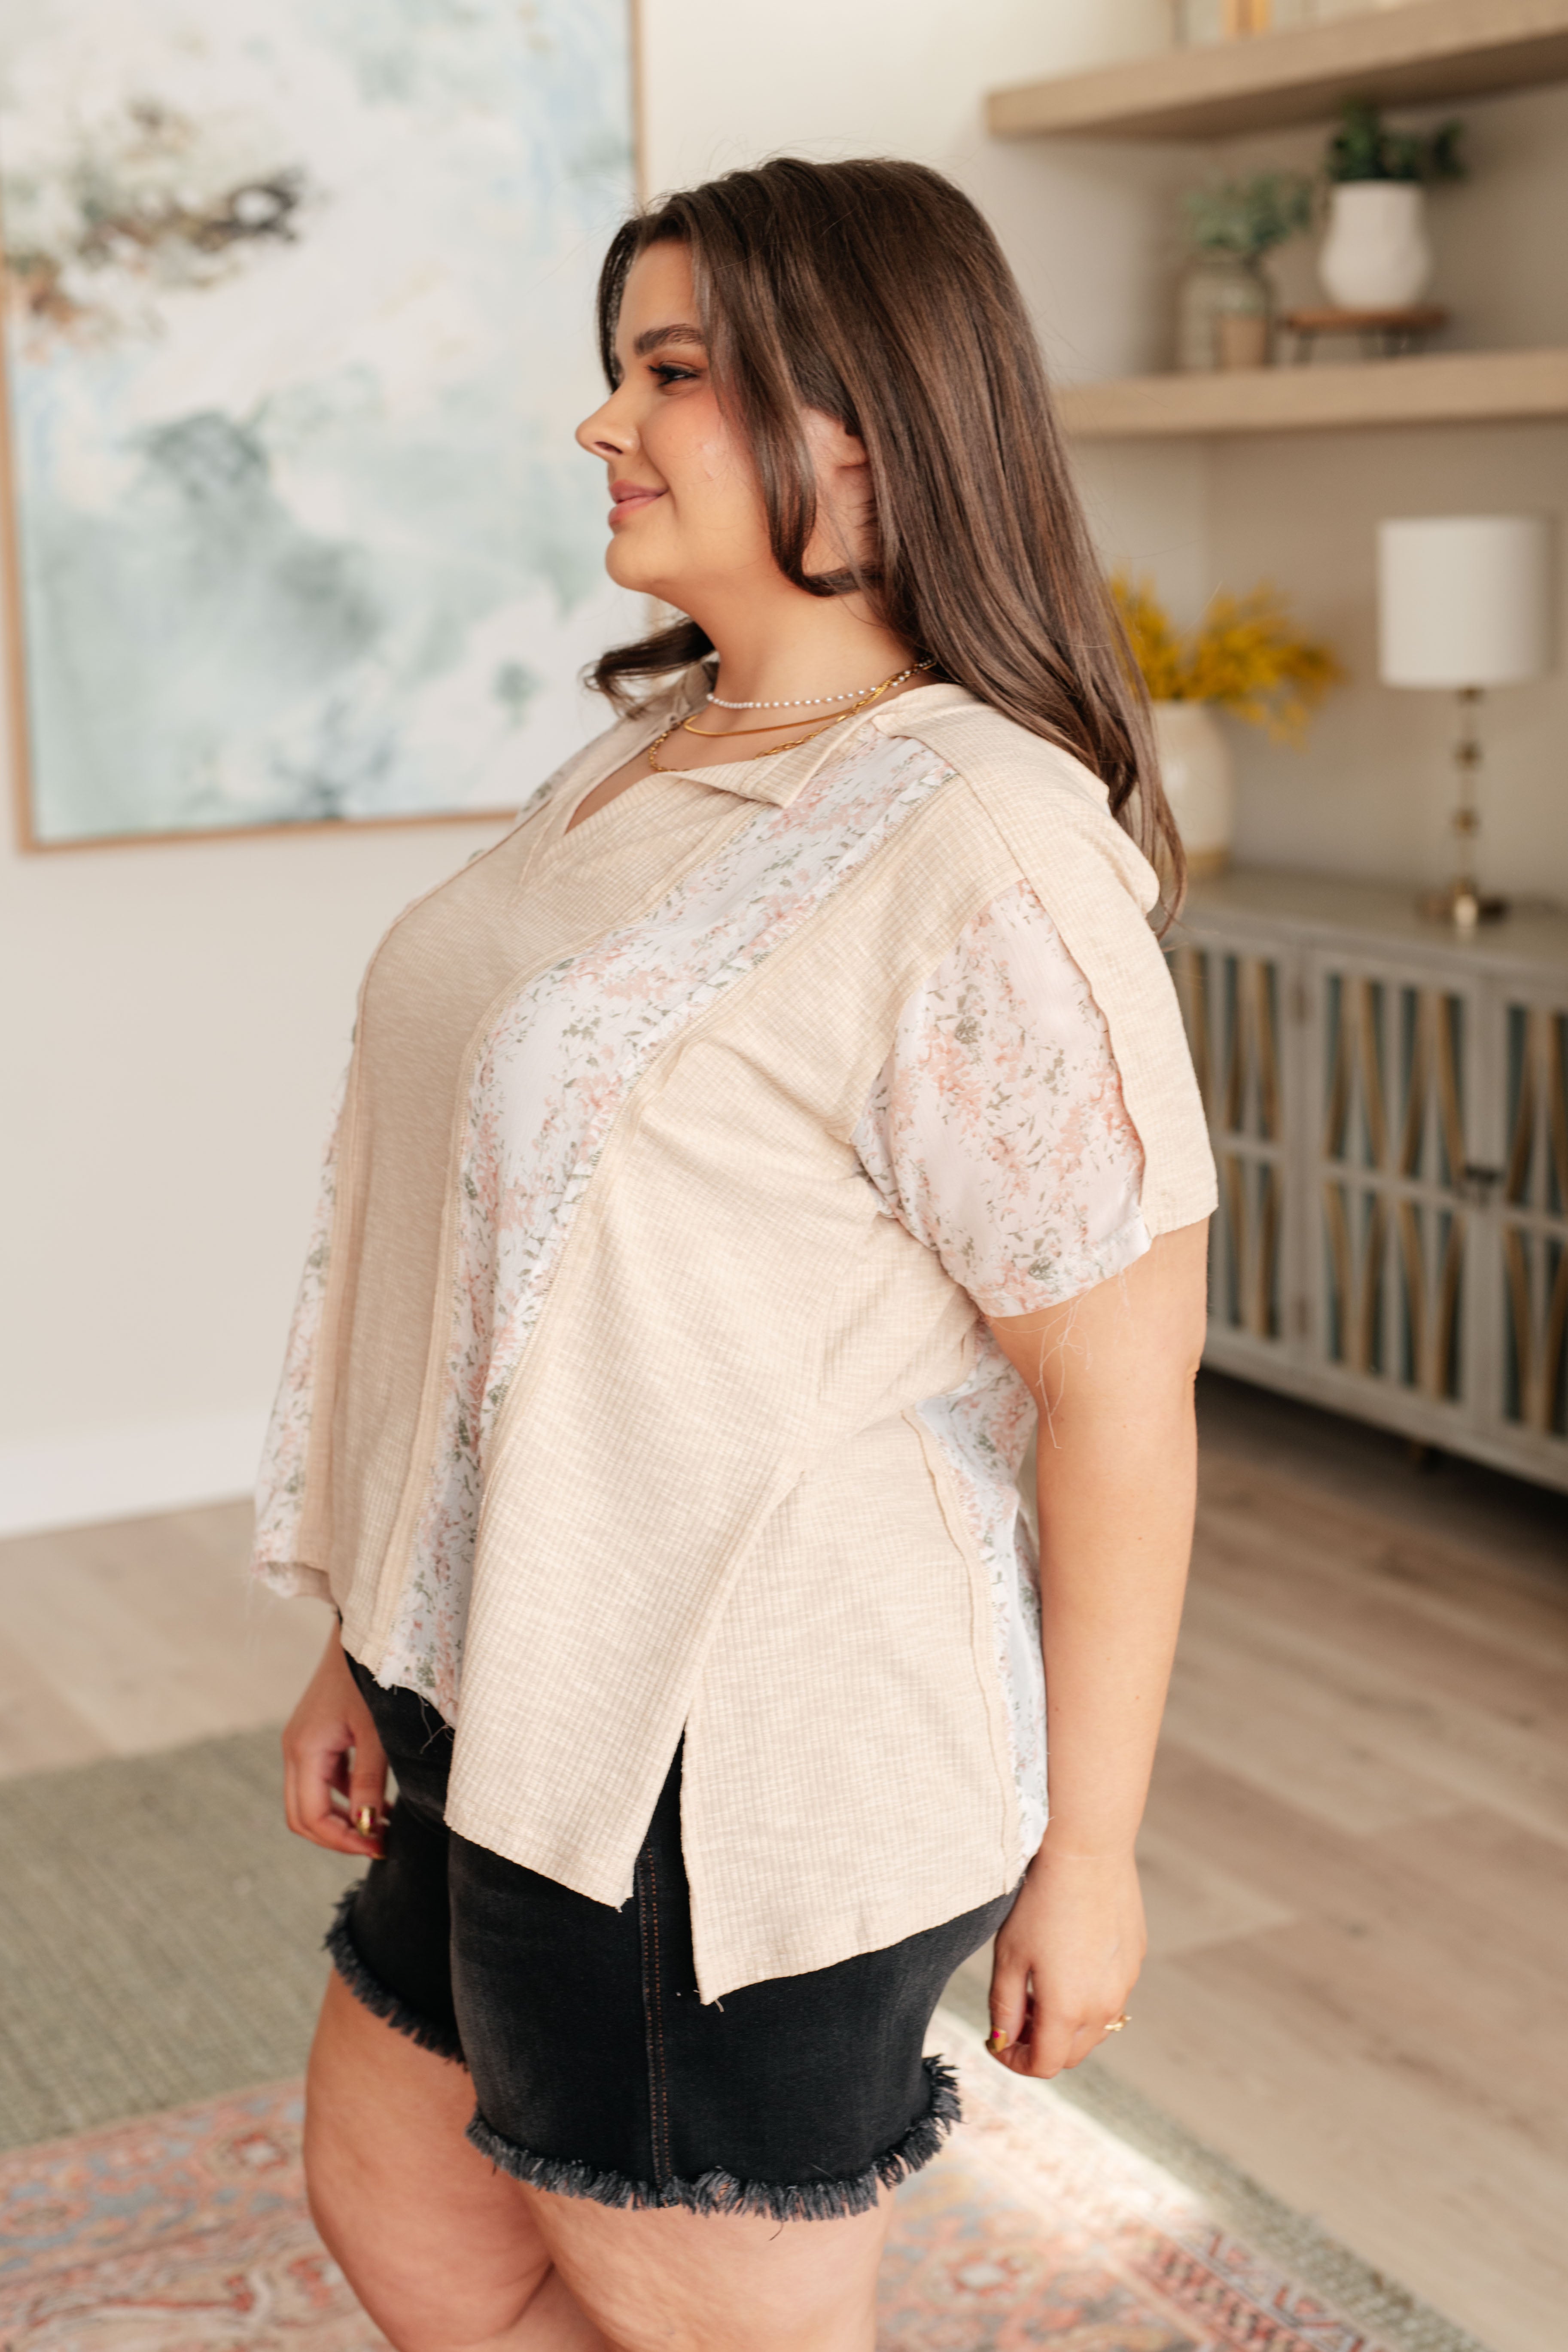 Mention Me Floral Accent Top in Toasted Almond Tops Ave Shops   